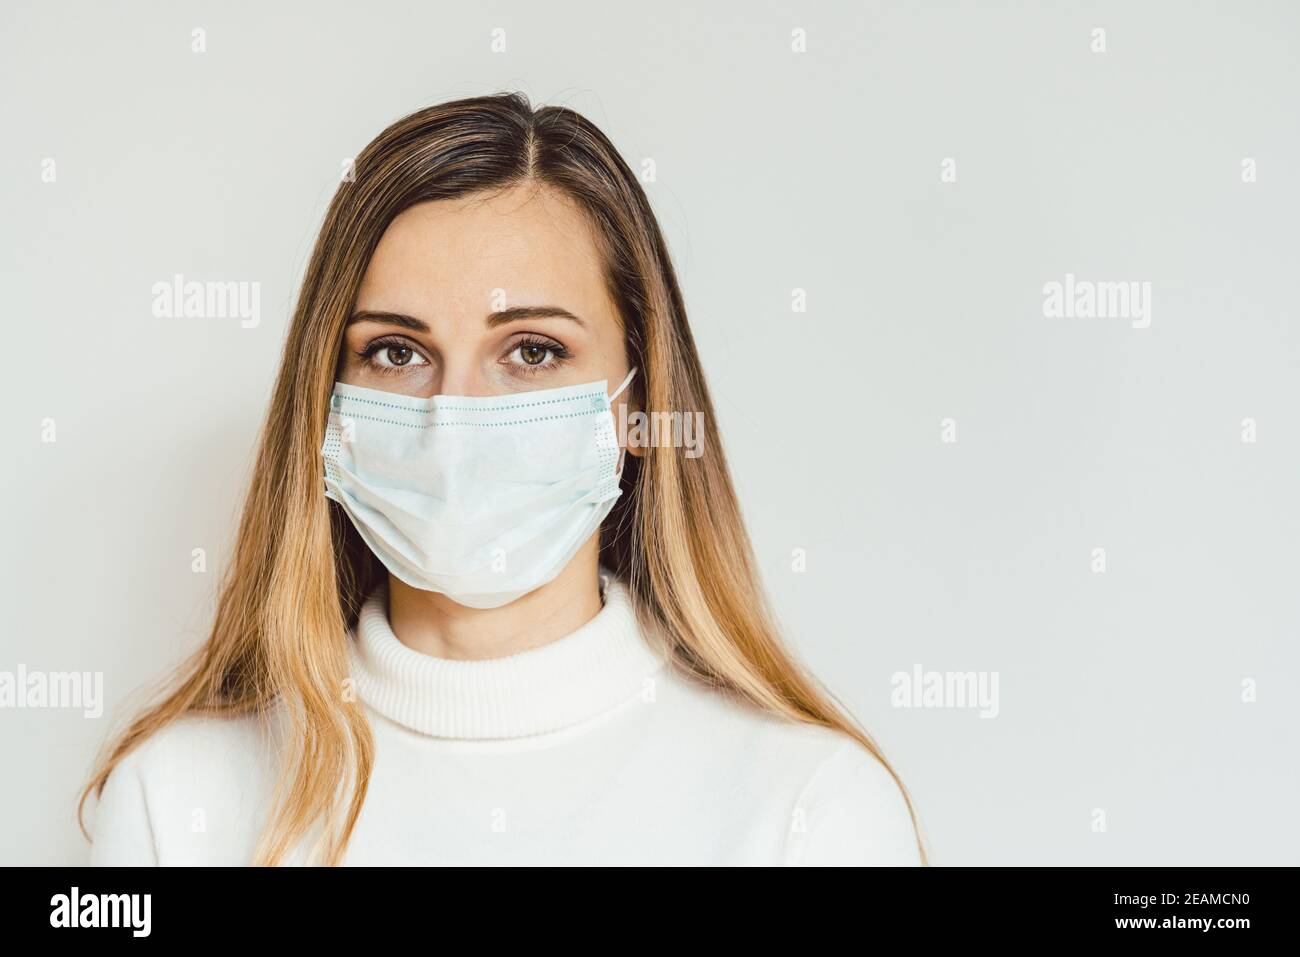 Worried woman during Covid-19 crisis in quarantine Stock Photo